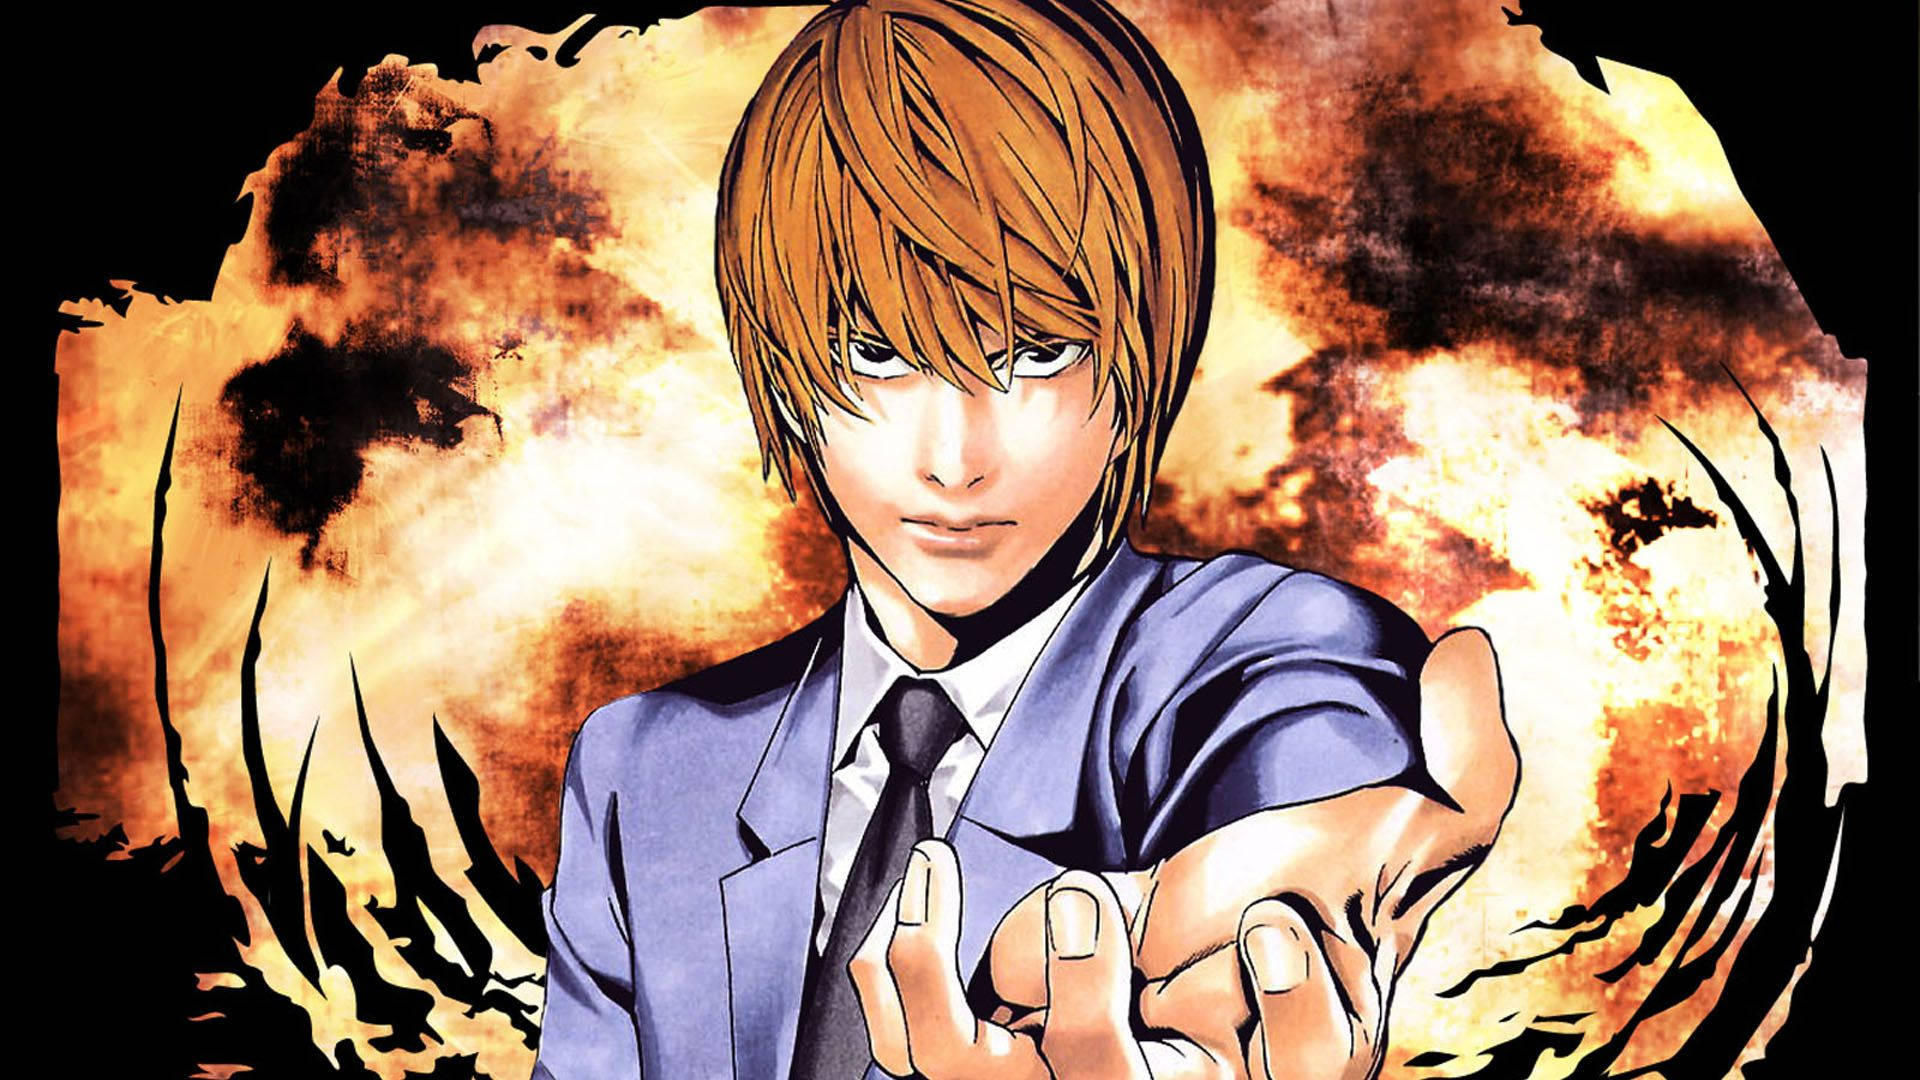 Free Light Yagami Wallpaper Downloads, [100+] Light Yagami Wallpapers for  FREE 